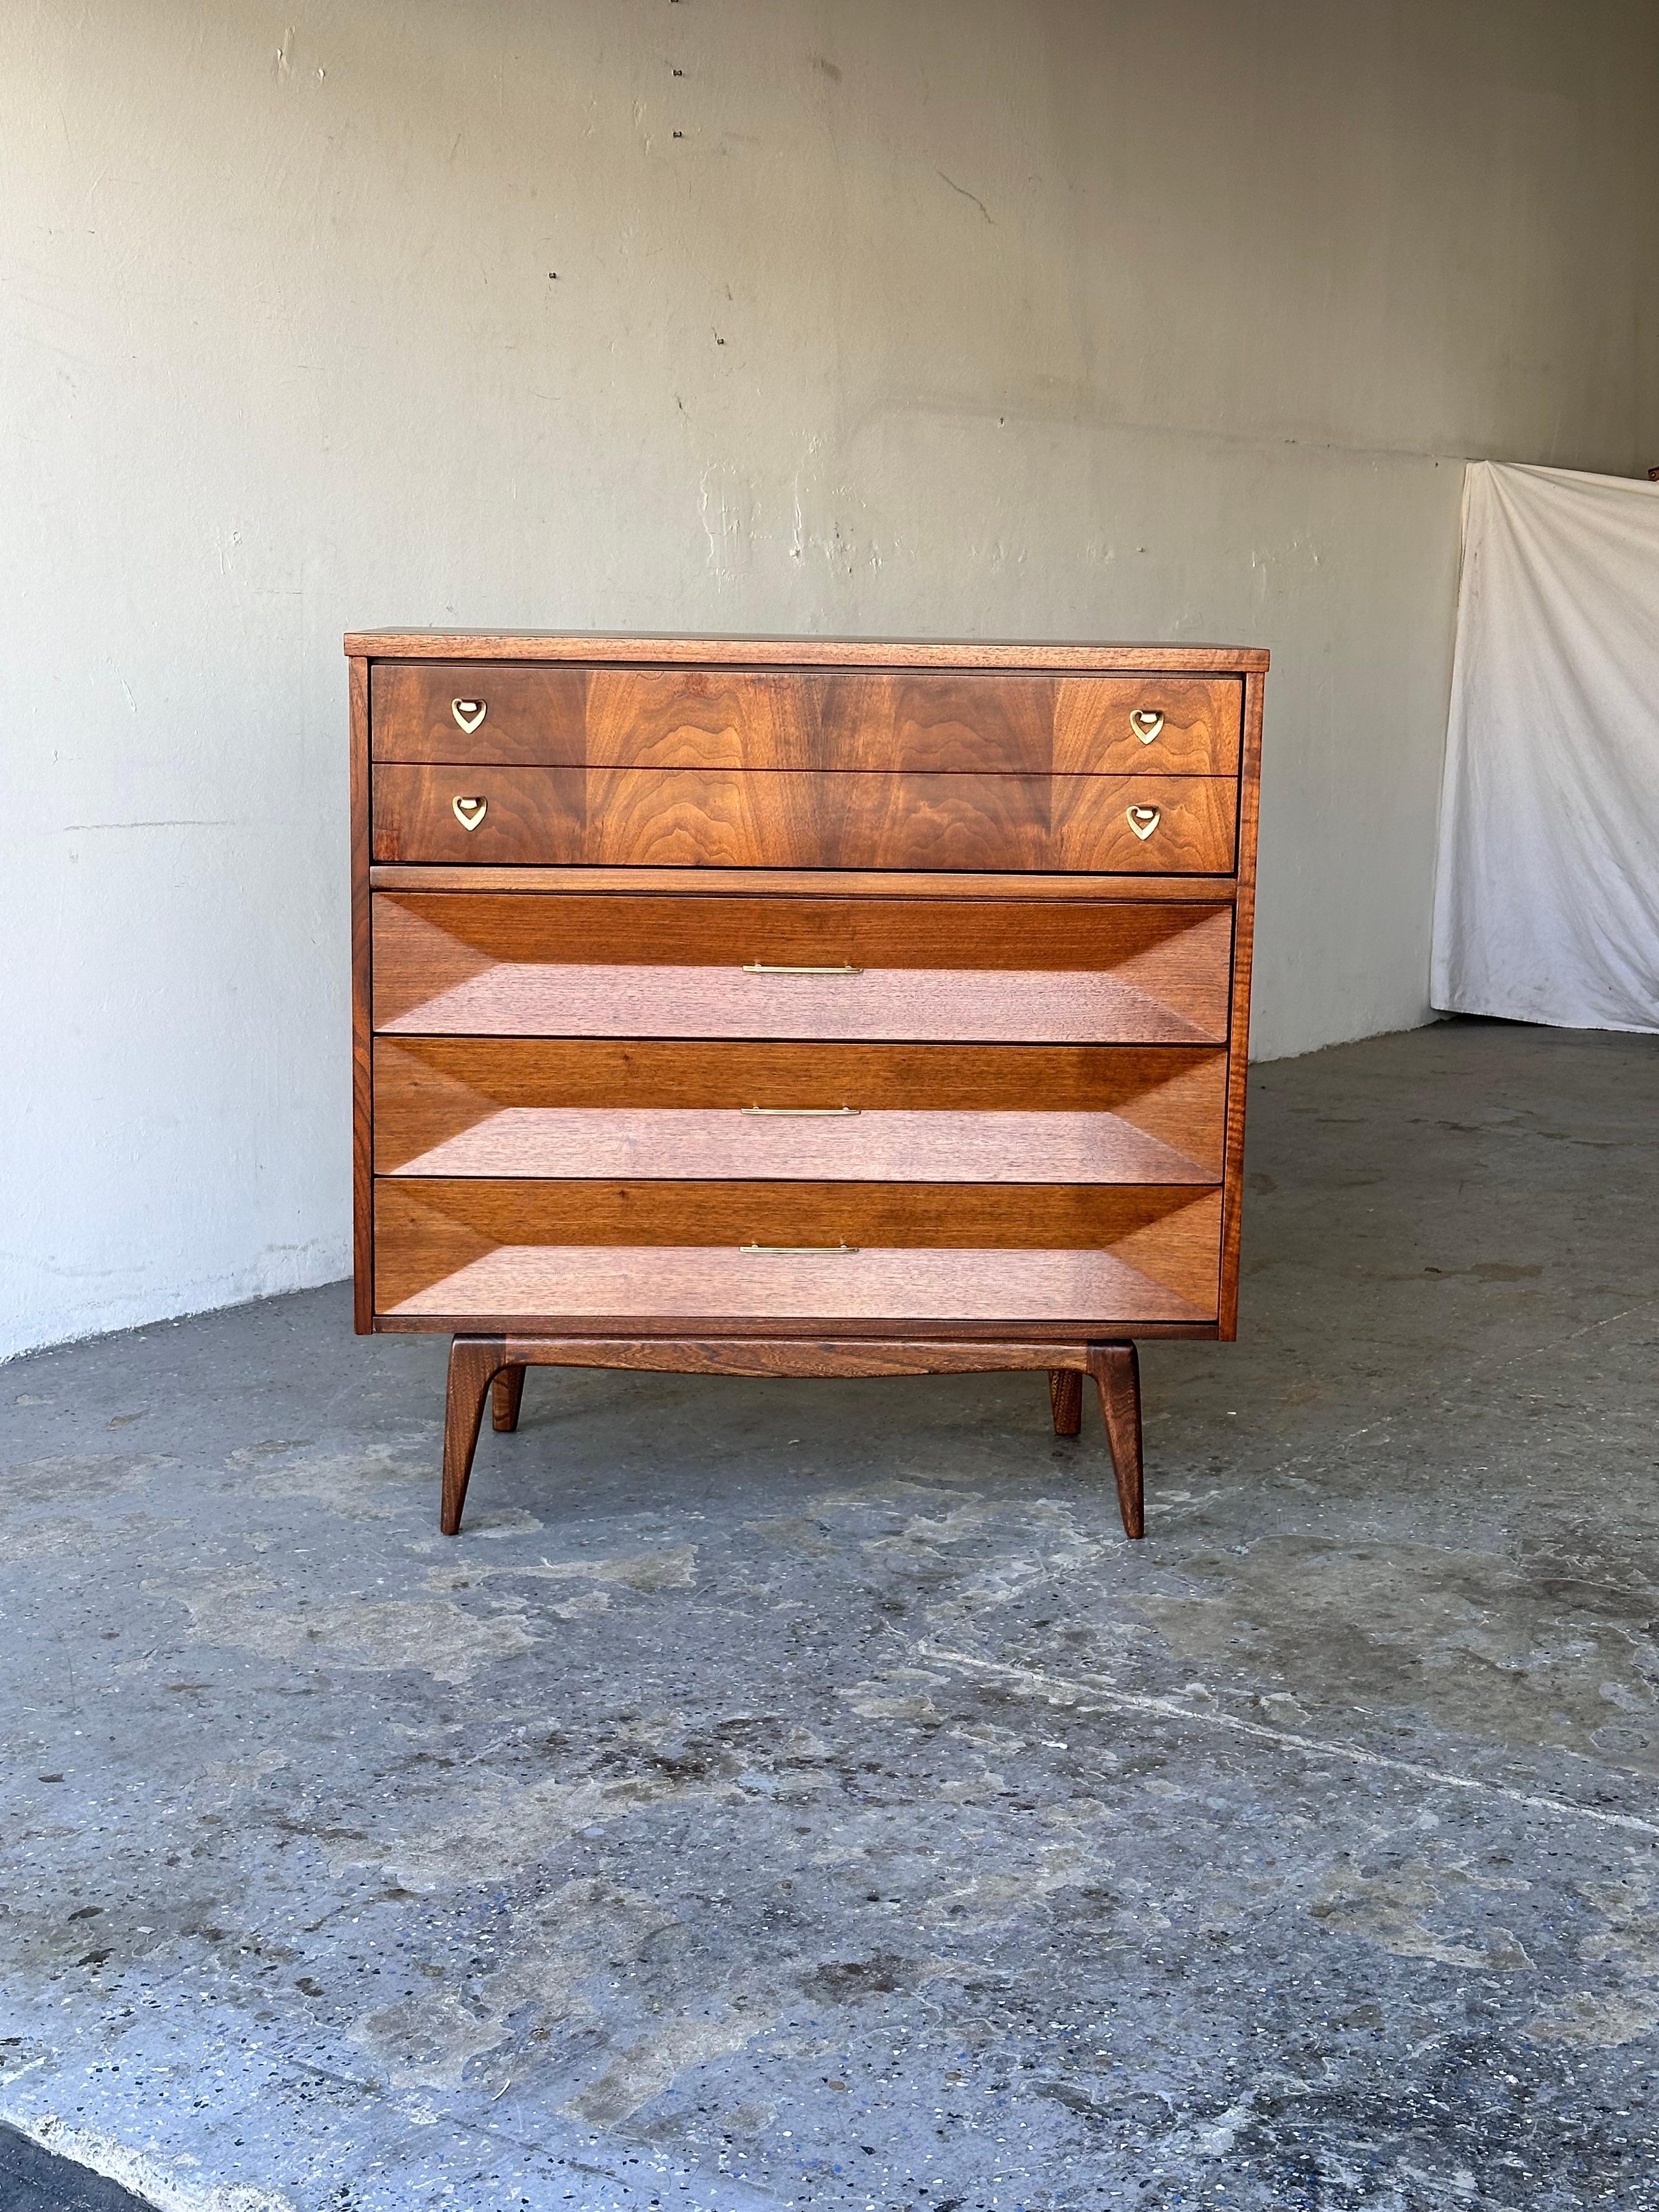 
Gorgeous Walnut Diamond Mid-Century Modern Highboy Dresser by United Furniture 

This mid century highboy dresser features original walnut finish, four drawer design, diamond fronts on the bottom three drawers, and a brass accented drawer pulls.